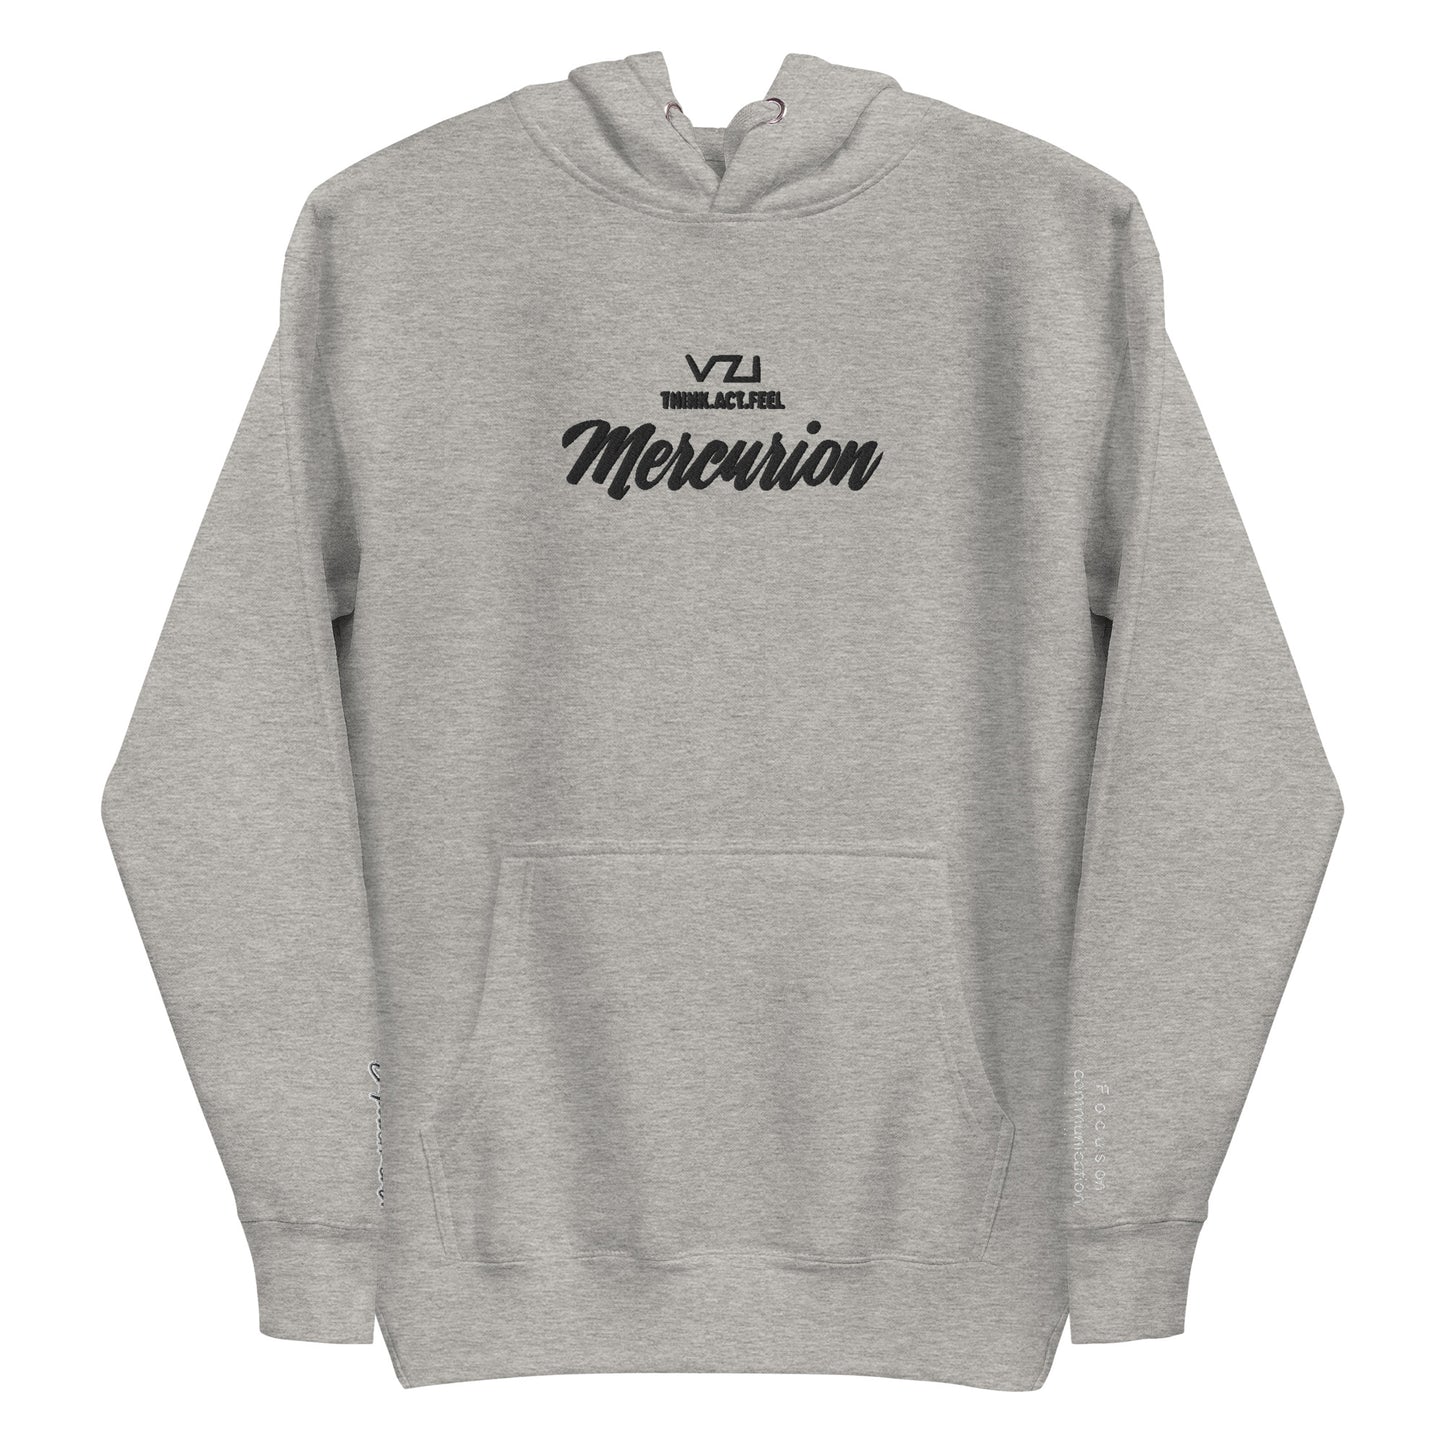 Mercurion: Men's Hoodie, Classic Cotton: Focus on communication, intelligence, and agility.(Empowerment)